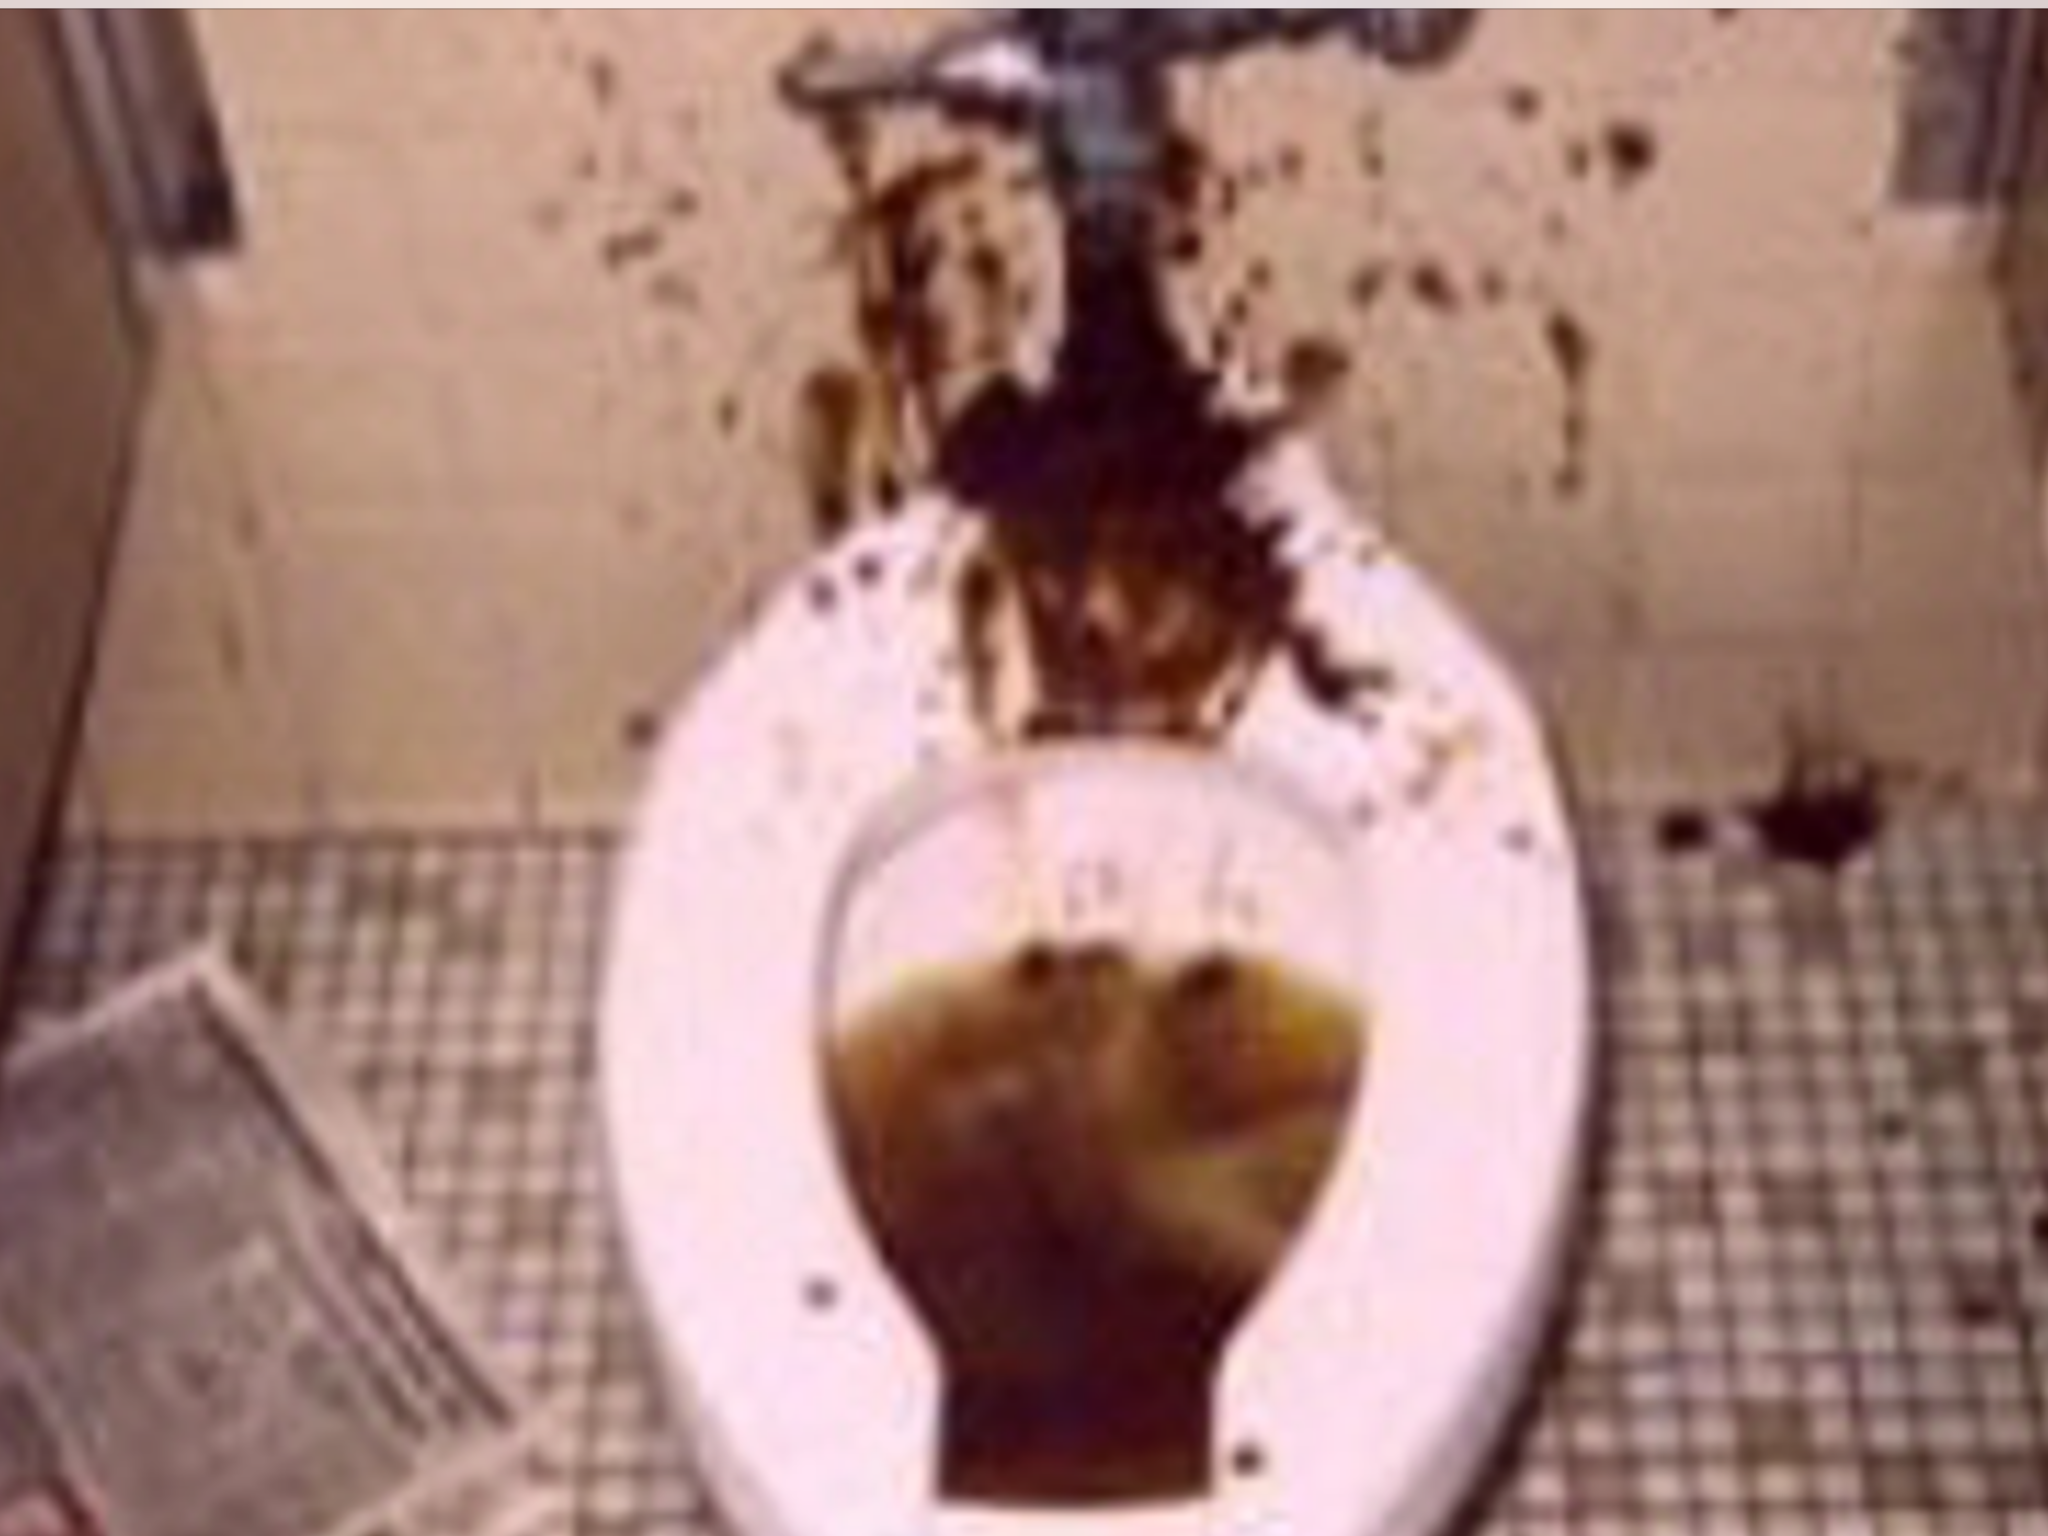 FLUSH BANK OF AMERICA DOWN THE TOILET